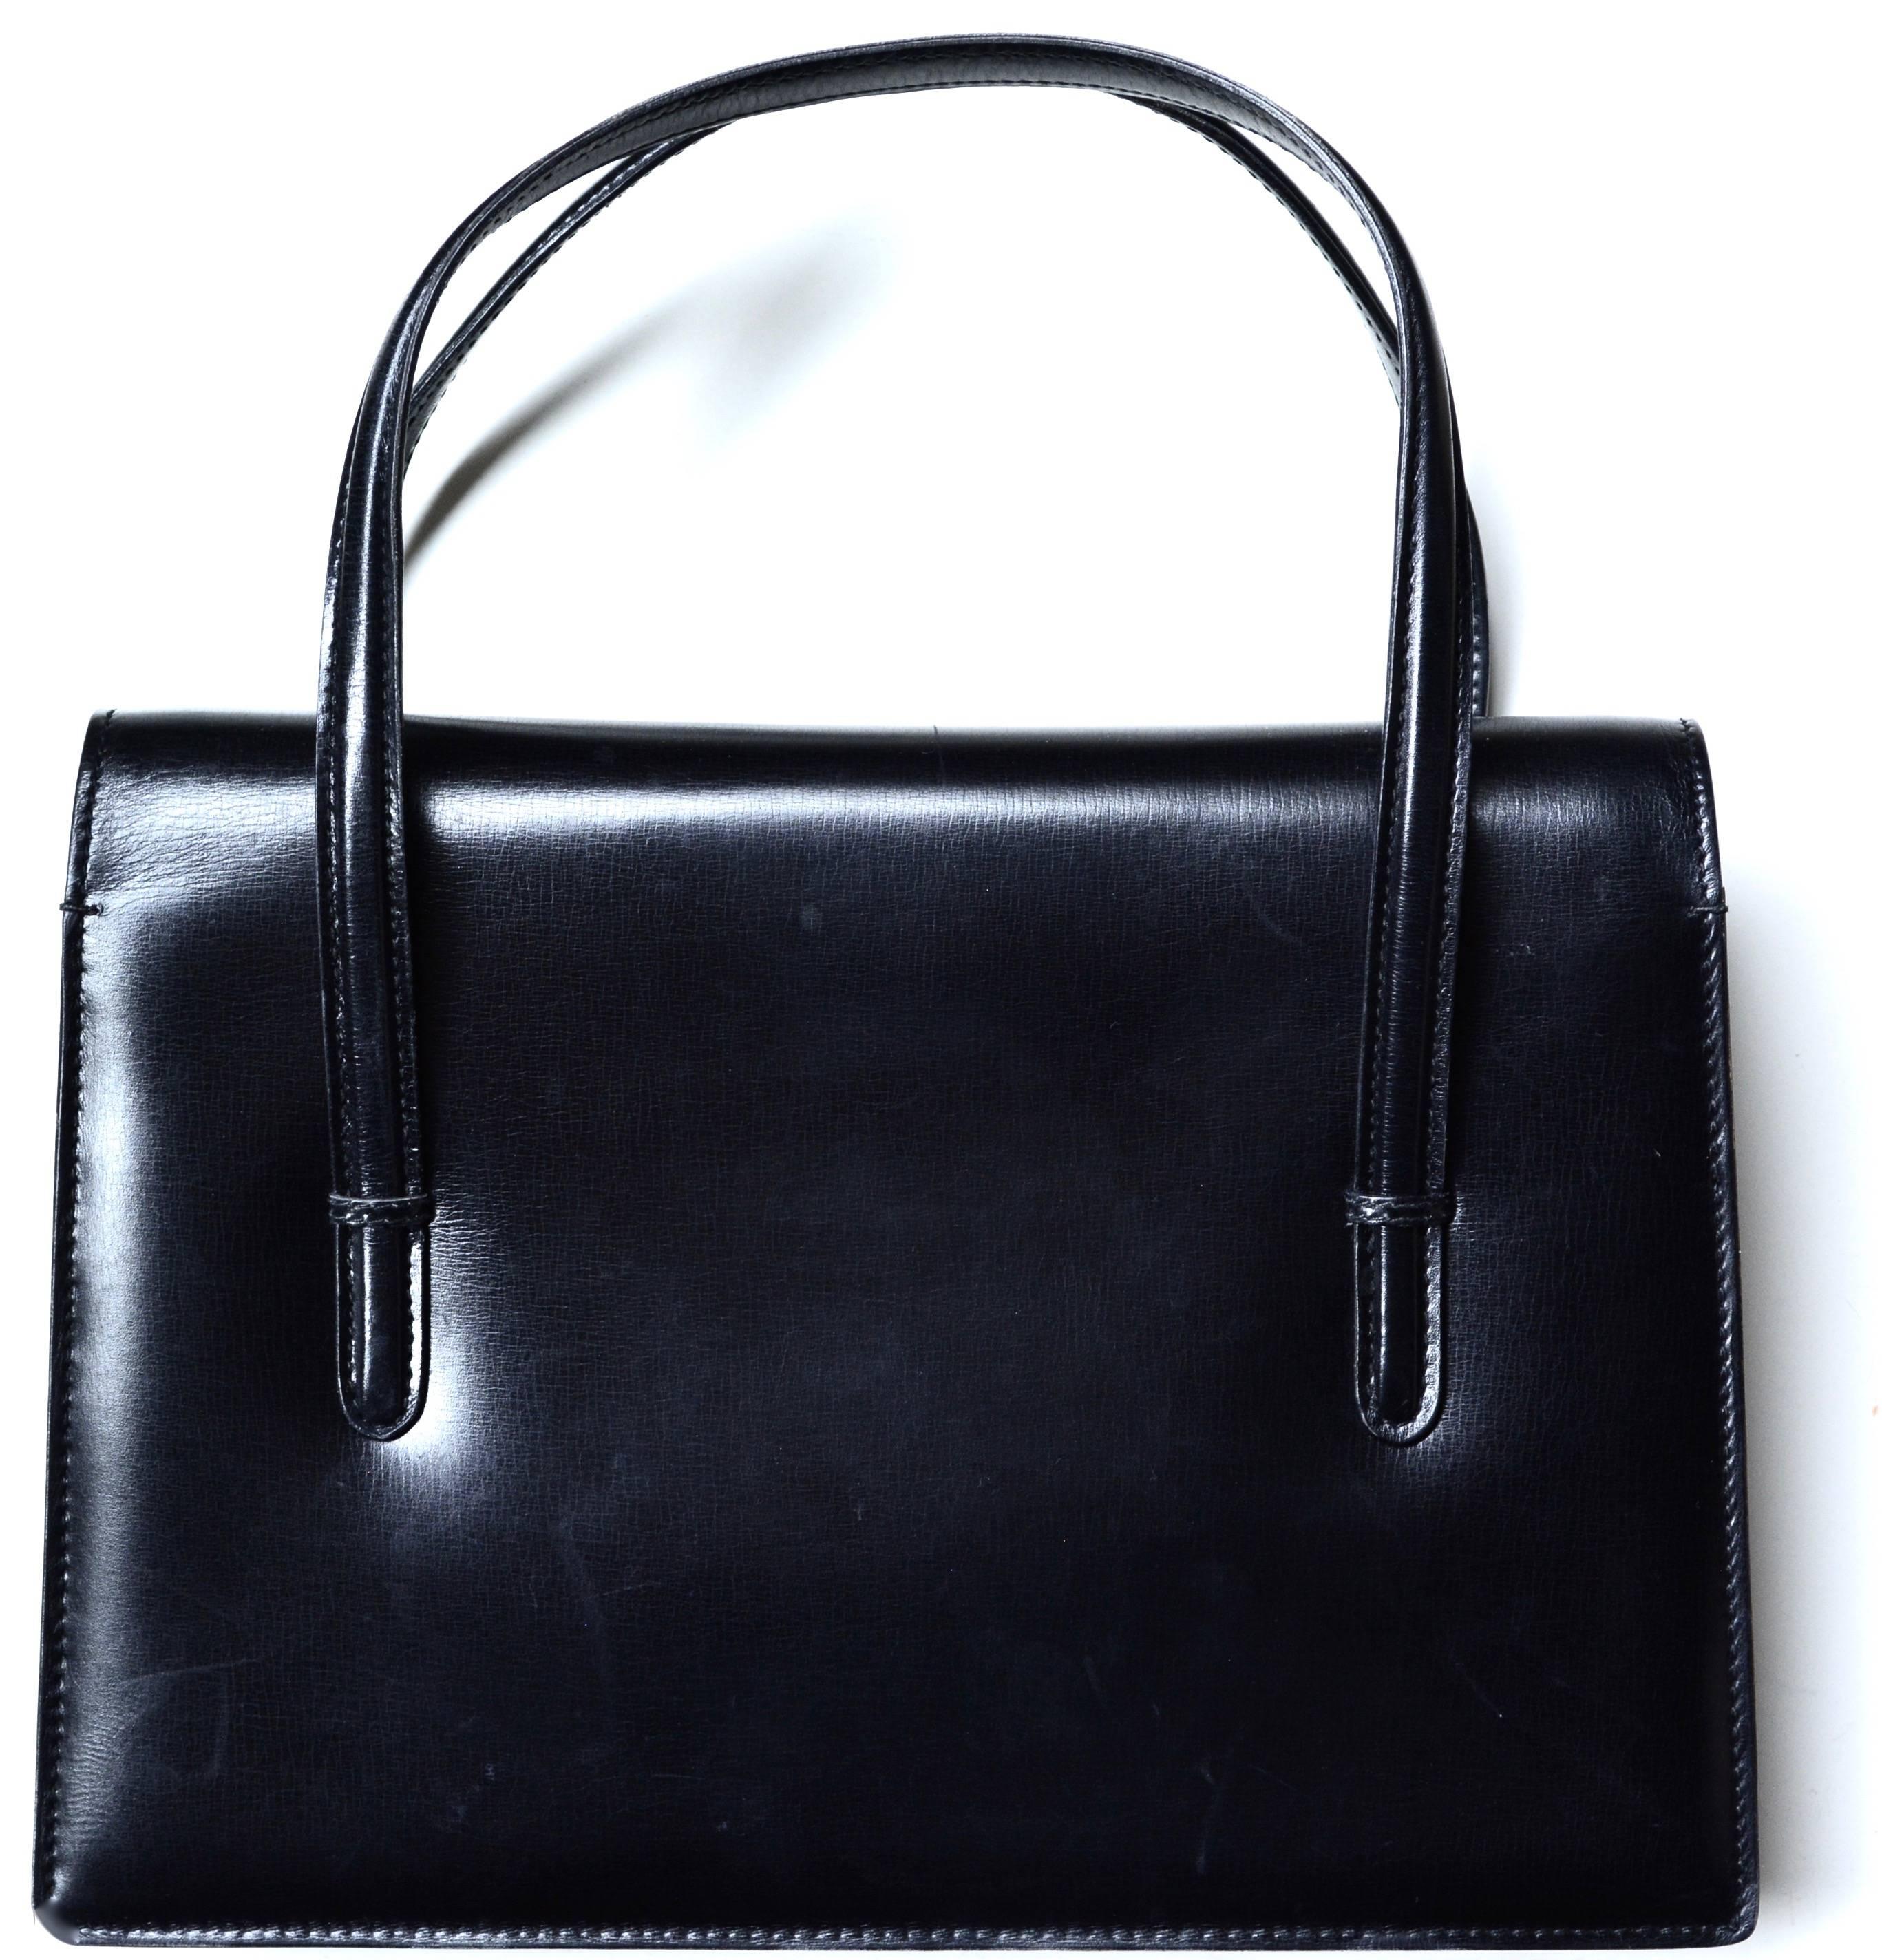 Signed Gucci soft, but structured black 1960s handbag. The bag is clean inside. Lovely classic design. Opens with a snap and has zip compartment inside. Condition is very good with minor signs of wear mostly to the bottom.  10